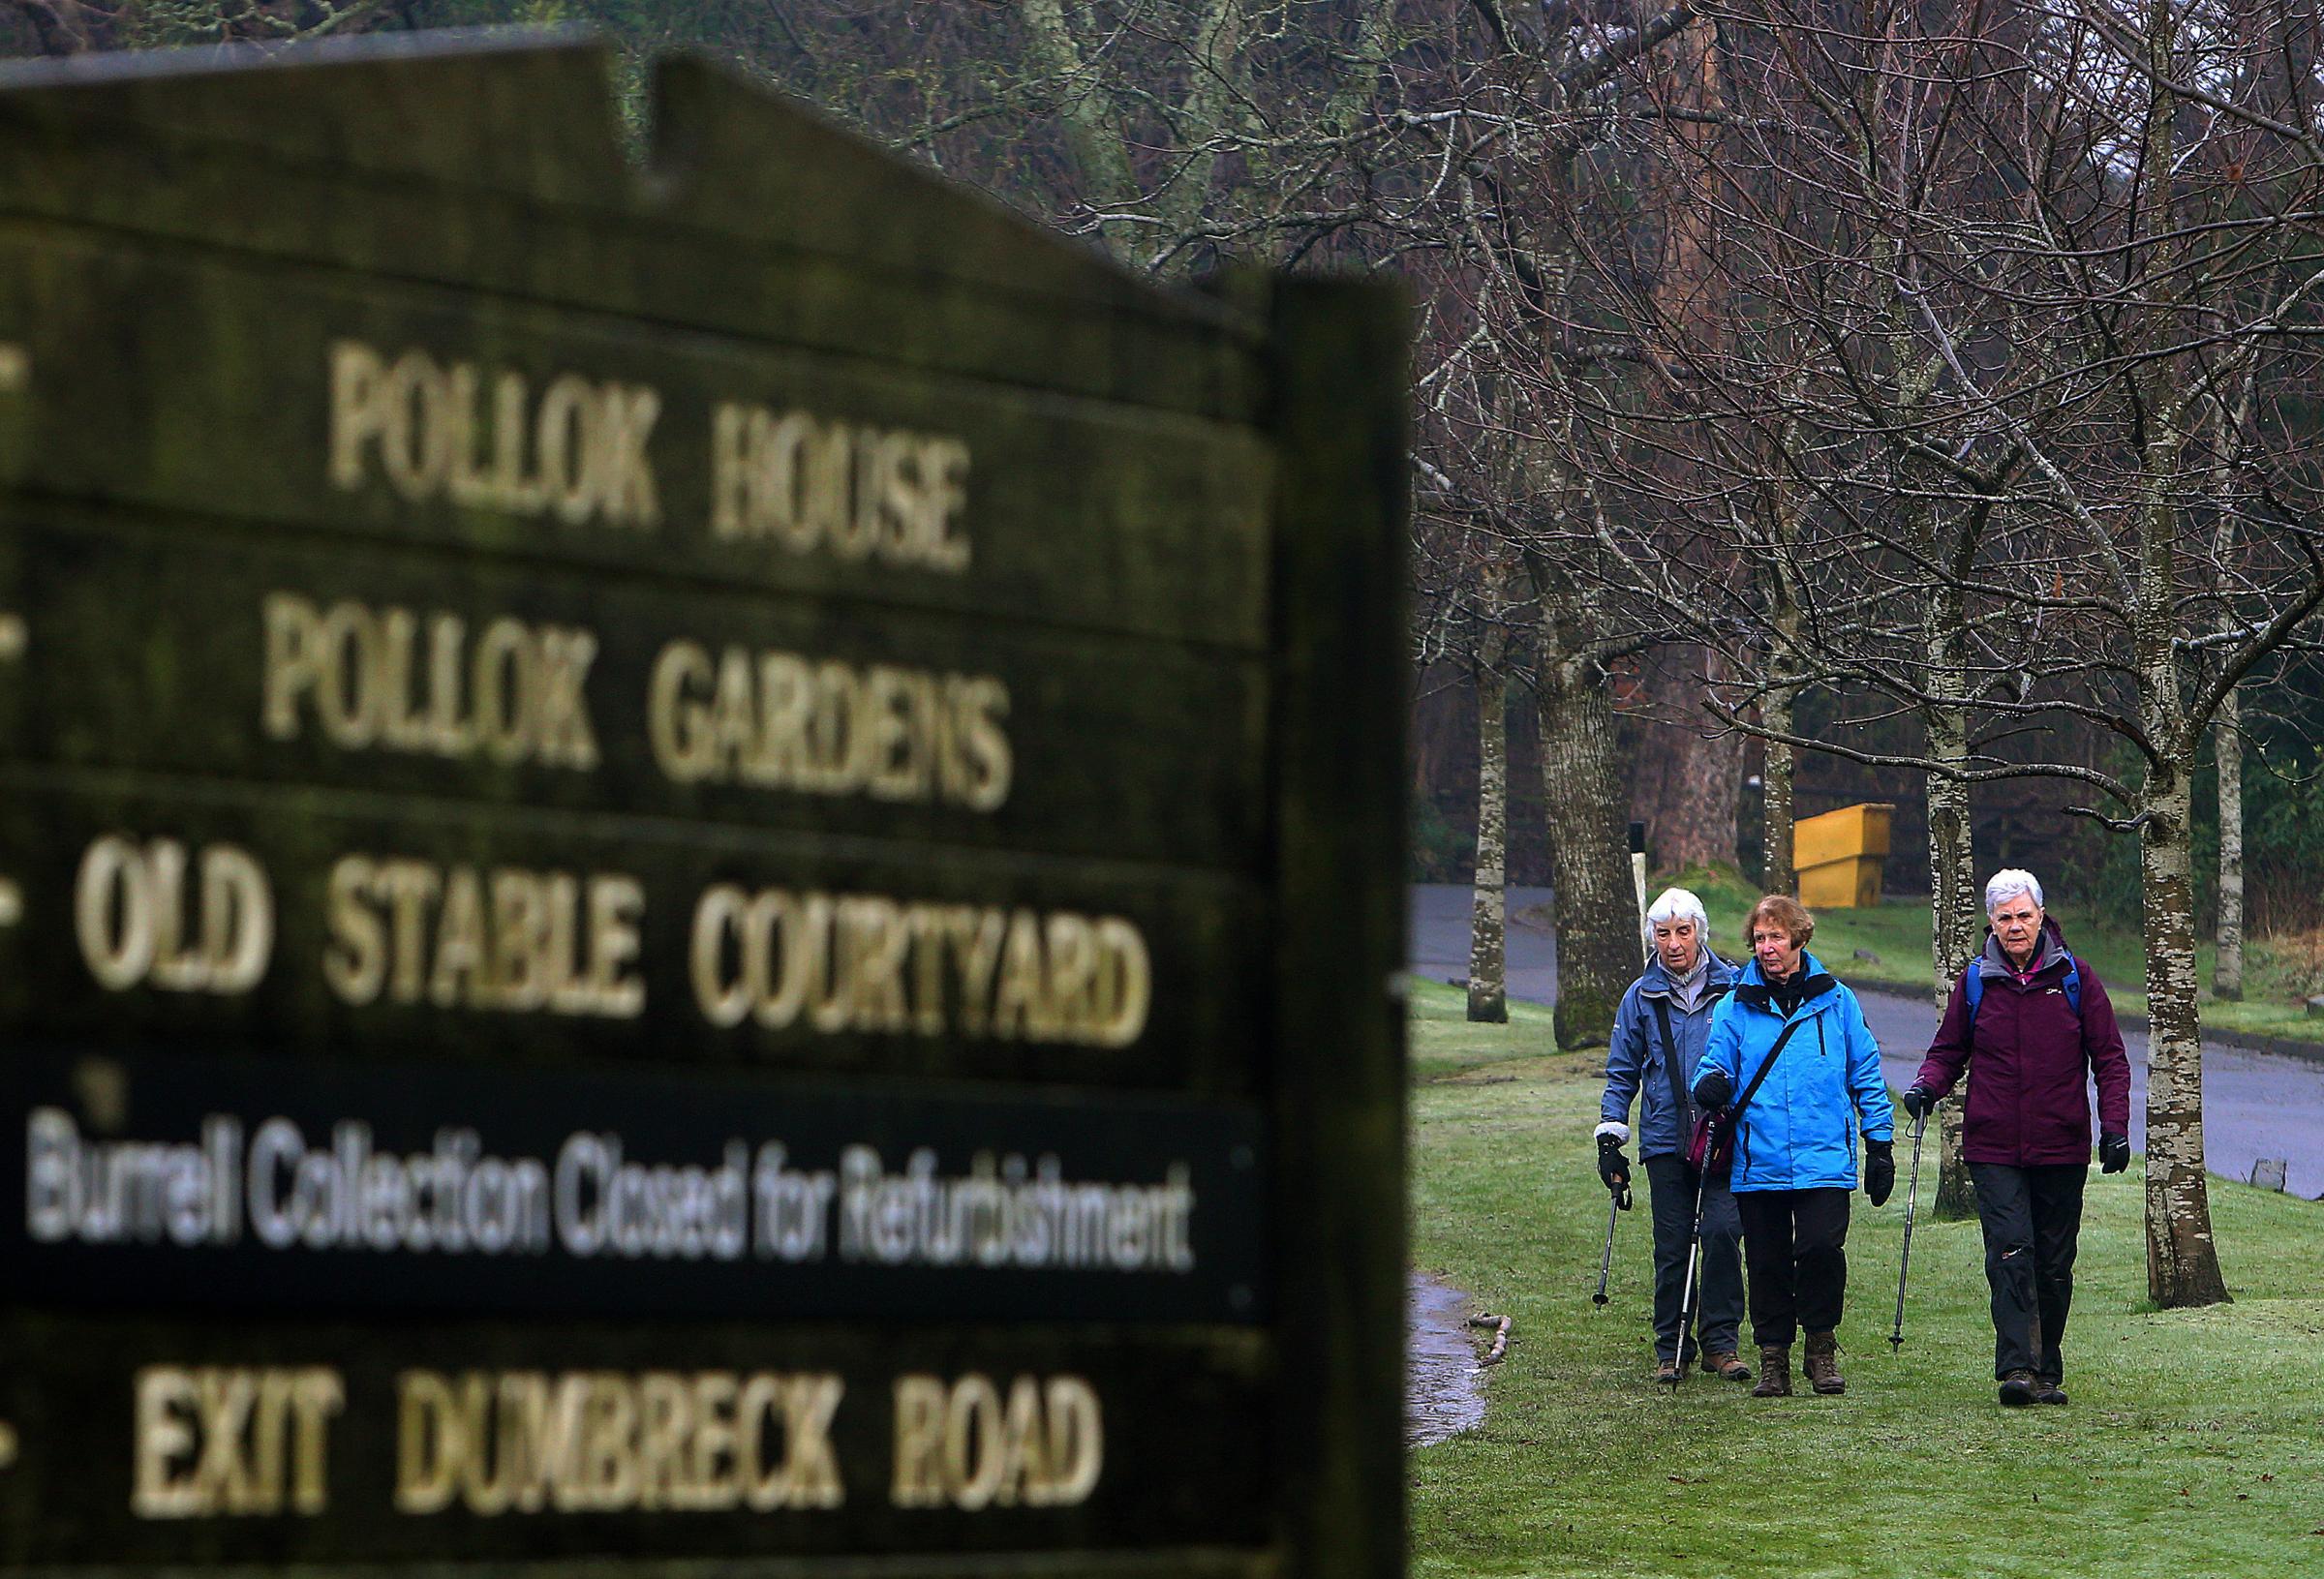 Glasgow City Council stepped forward with the offer Pollok Country Park as the location for the memorial